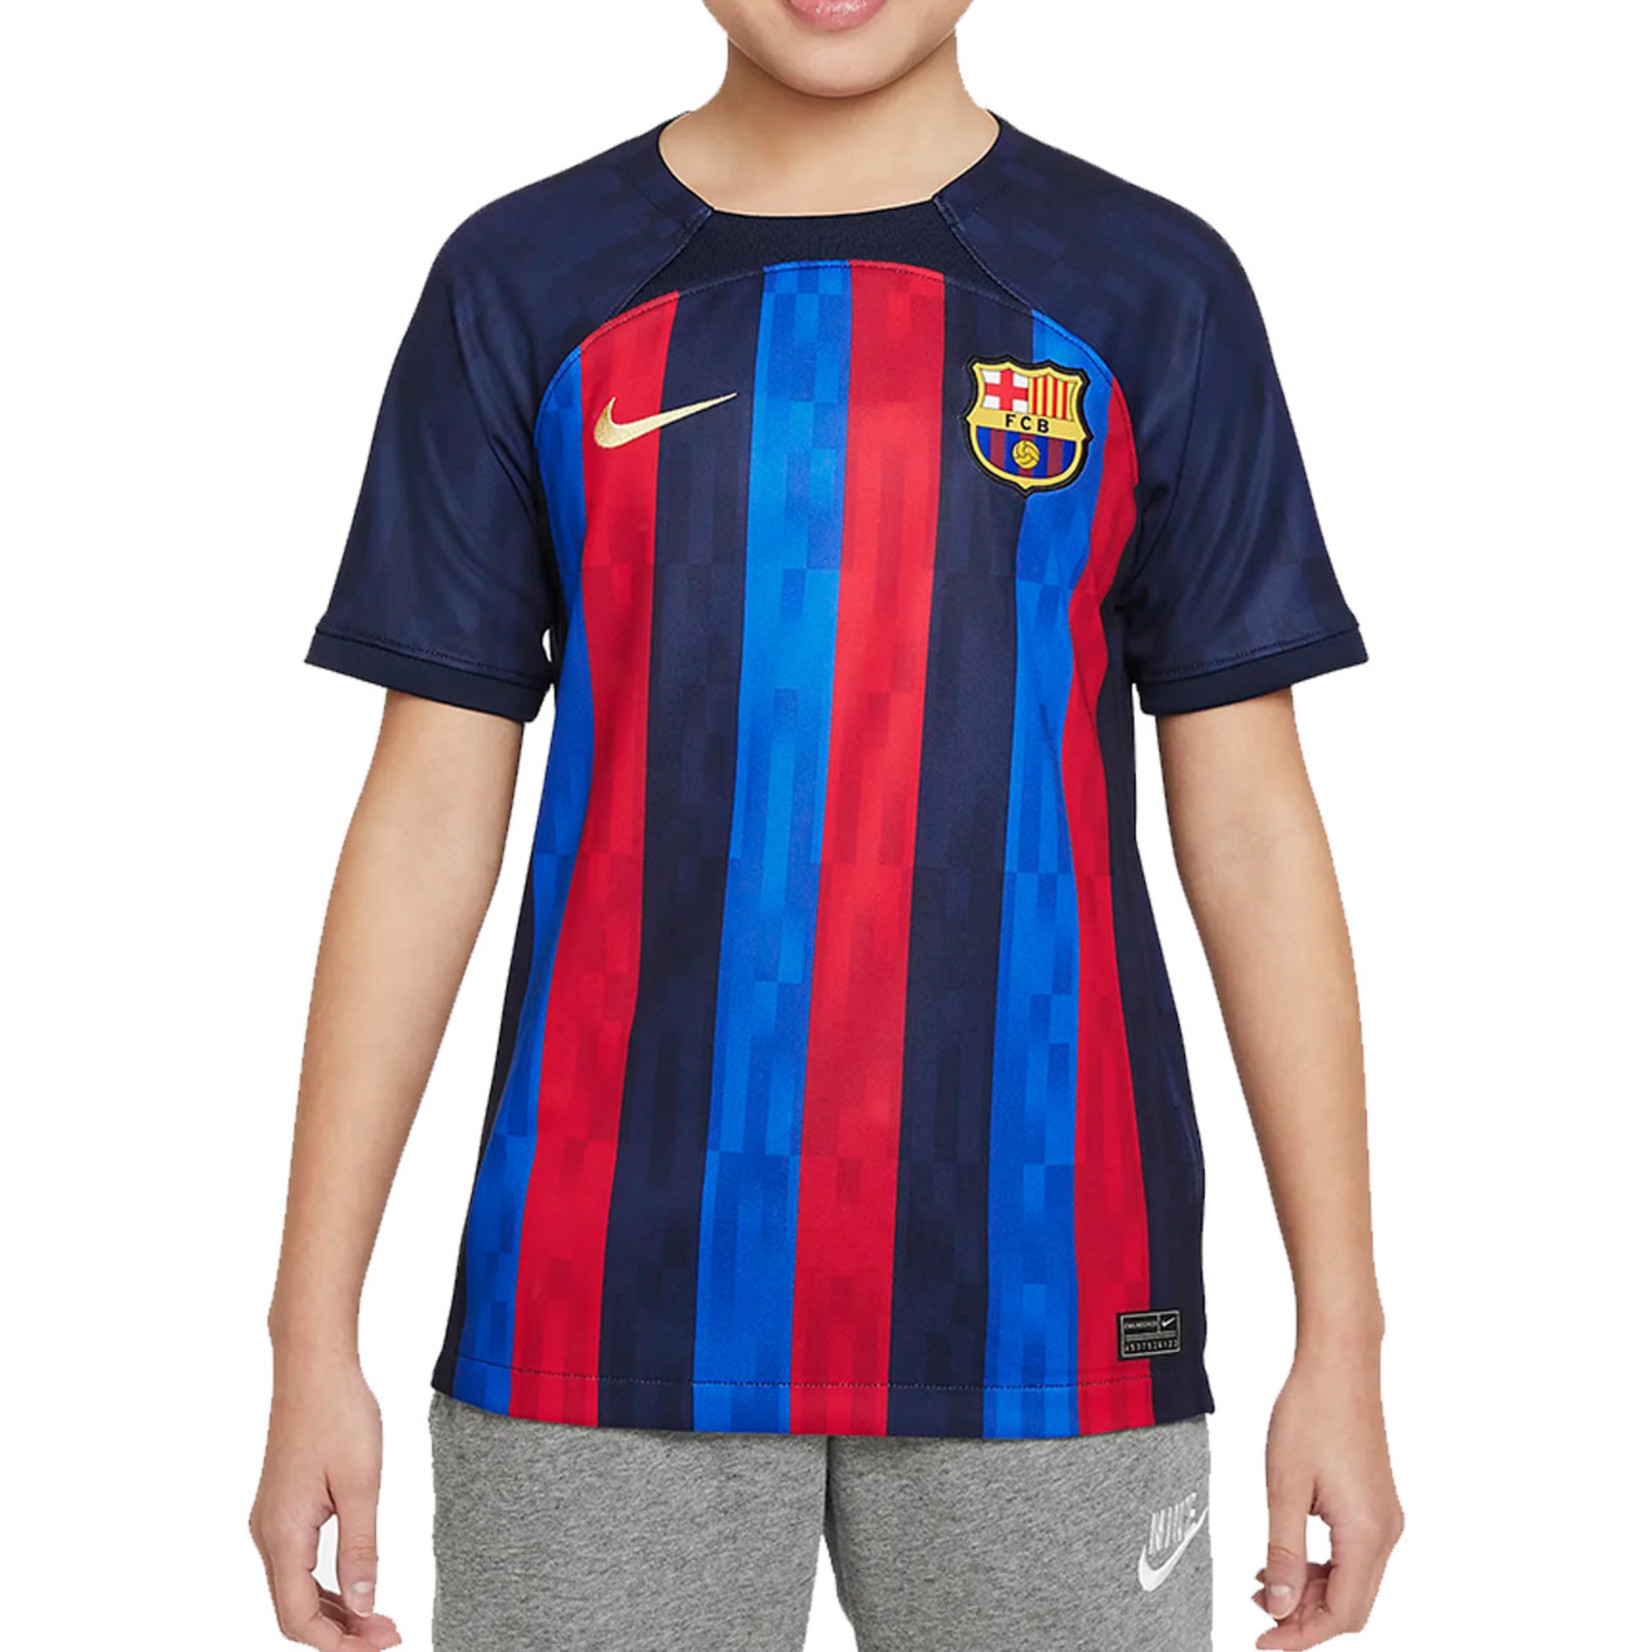 NIKE FC BARCELONA 22/23 HOME JERSEY YOUTH (NAVY/RED/BLUE)